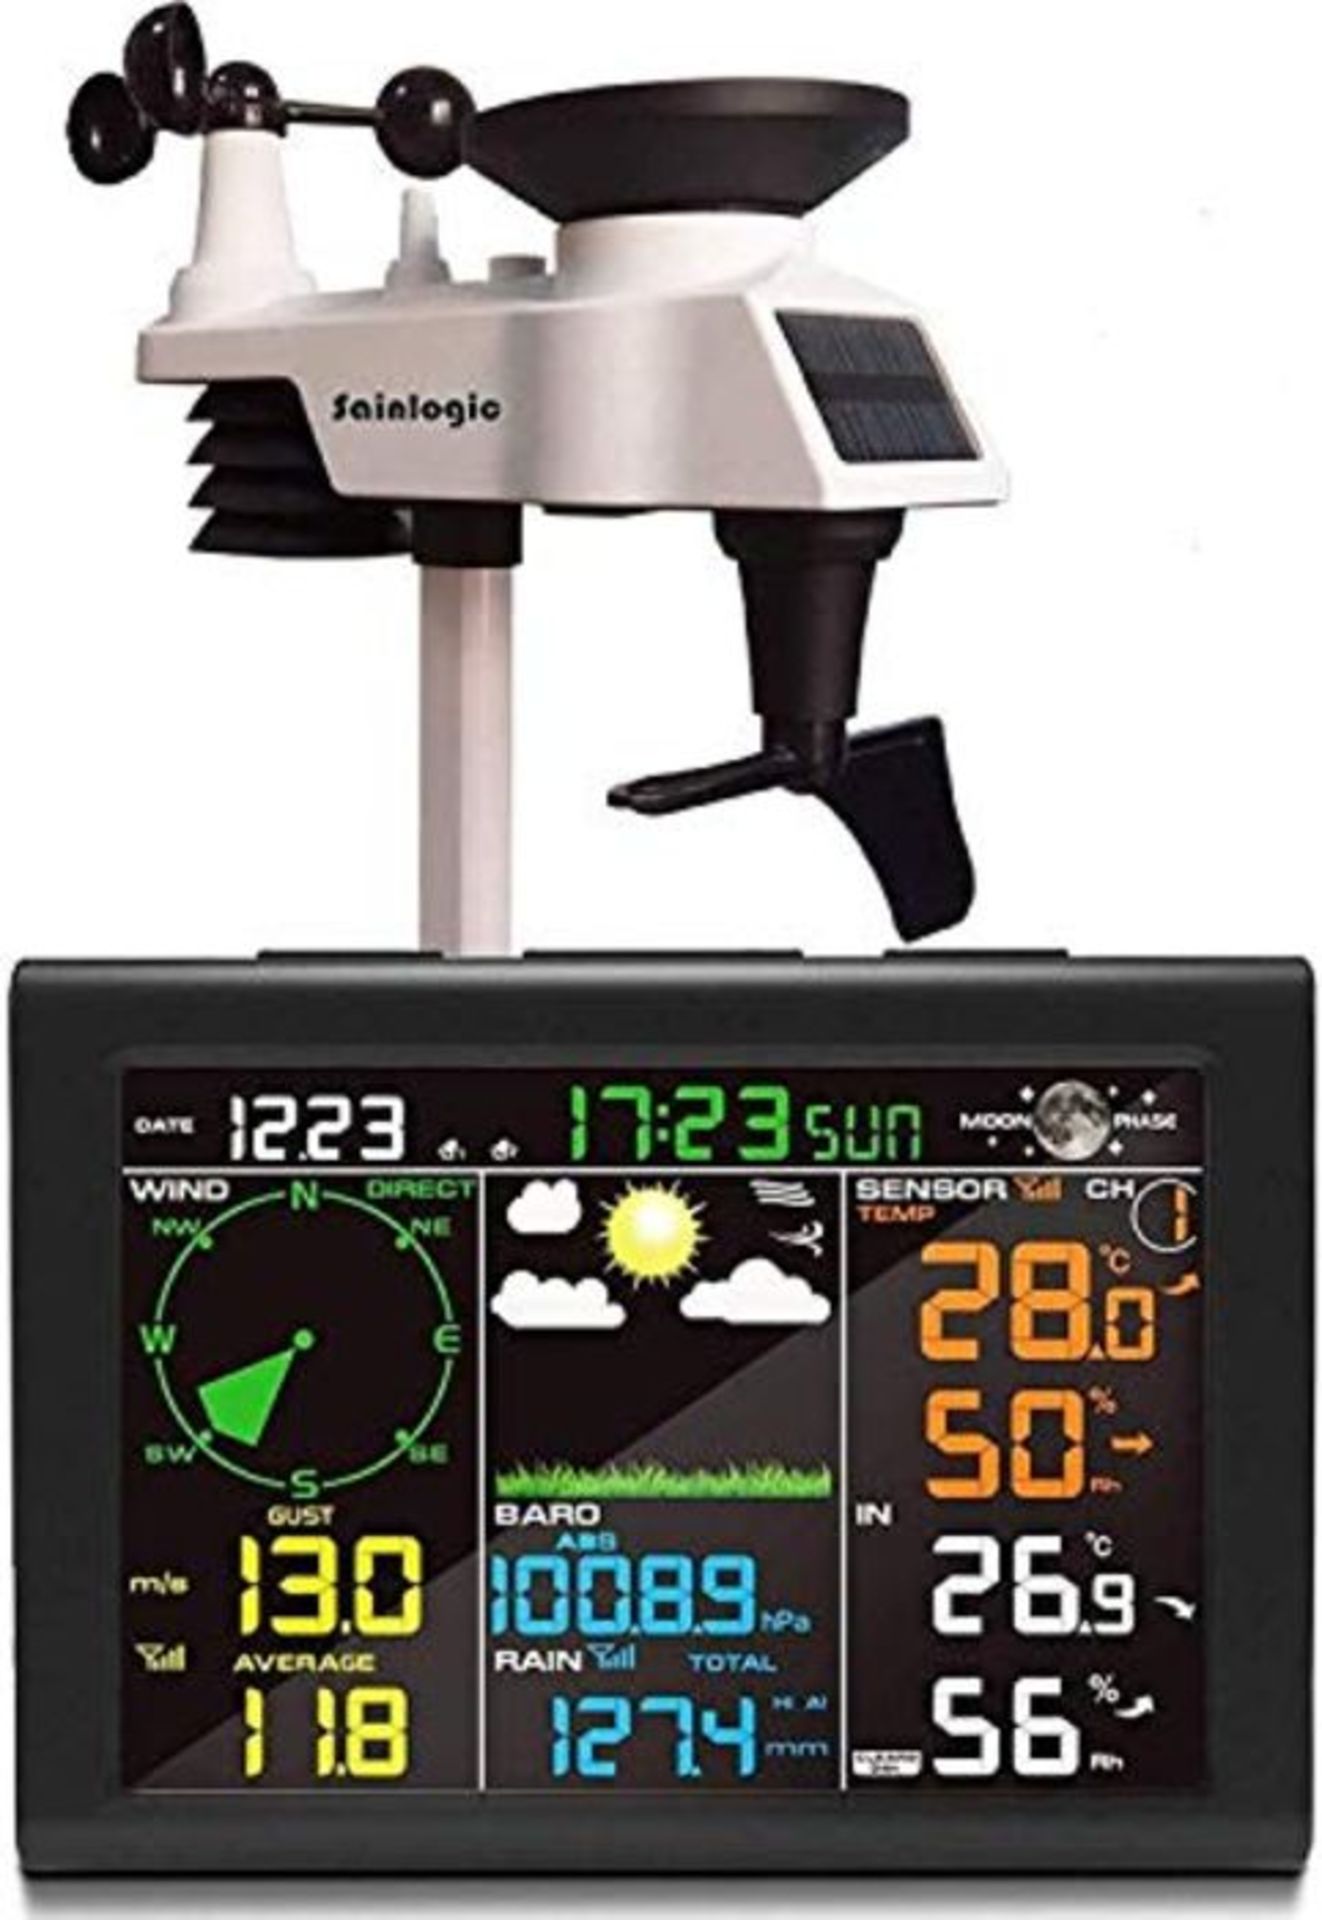 RRP £129.00 sainlogic FT0835 wireless weather station with outdoor sensor, 8-in-1 wireless weather